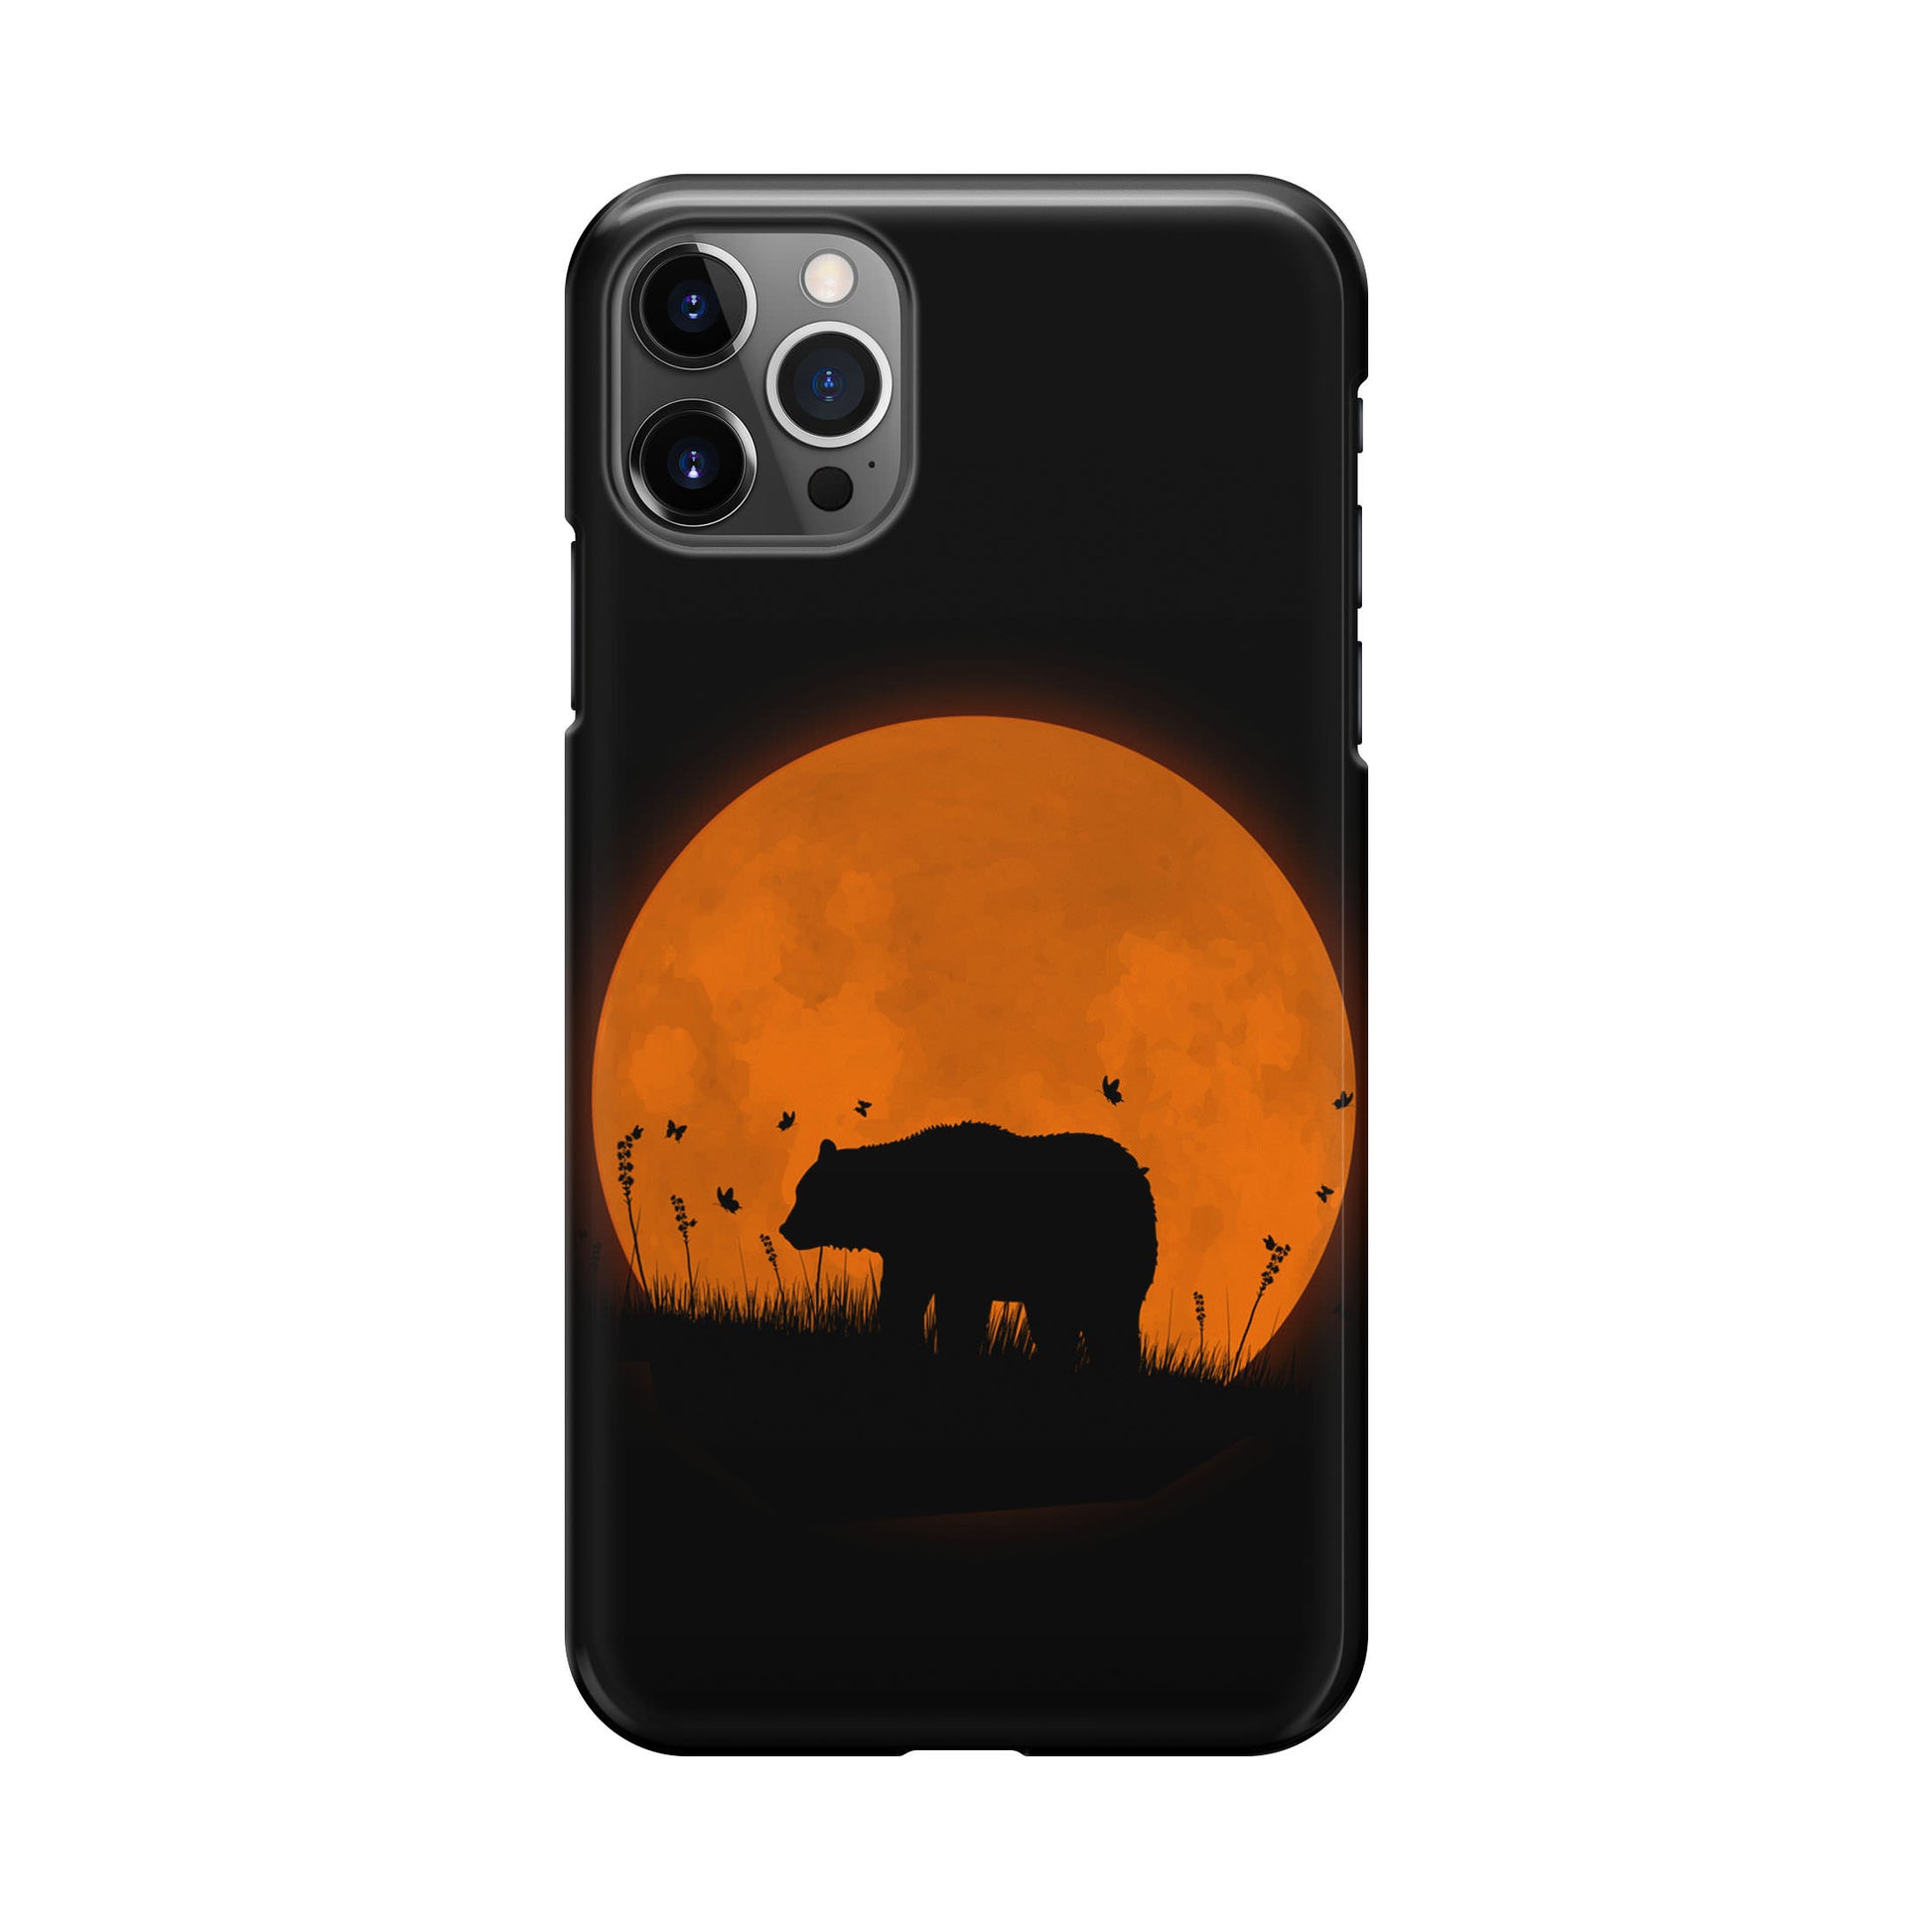 Bear Silhouette iPhone 12 Pro Max Case